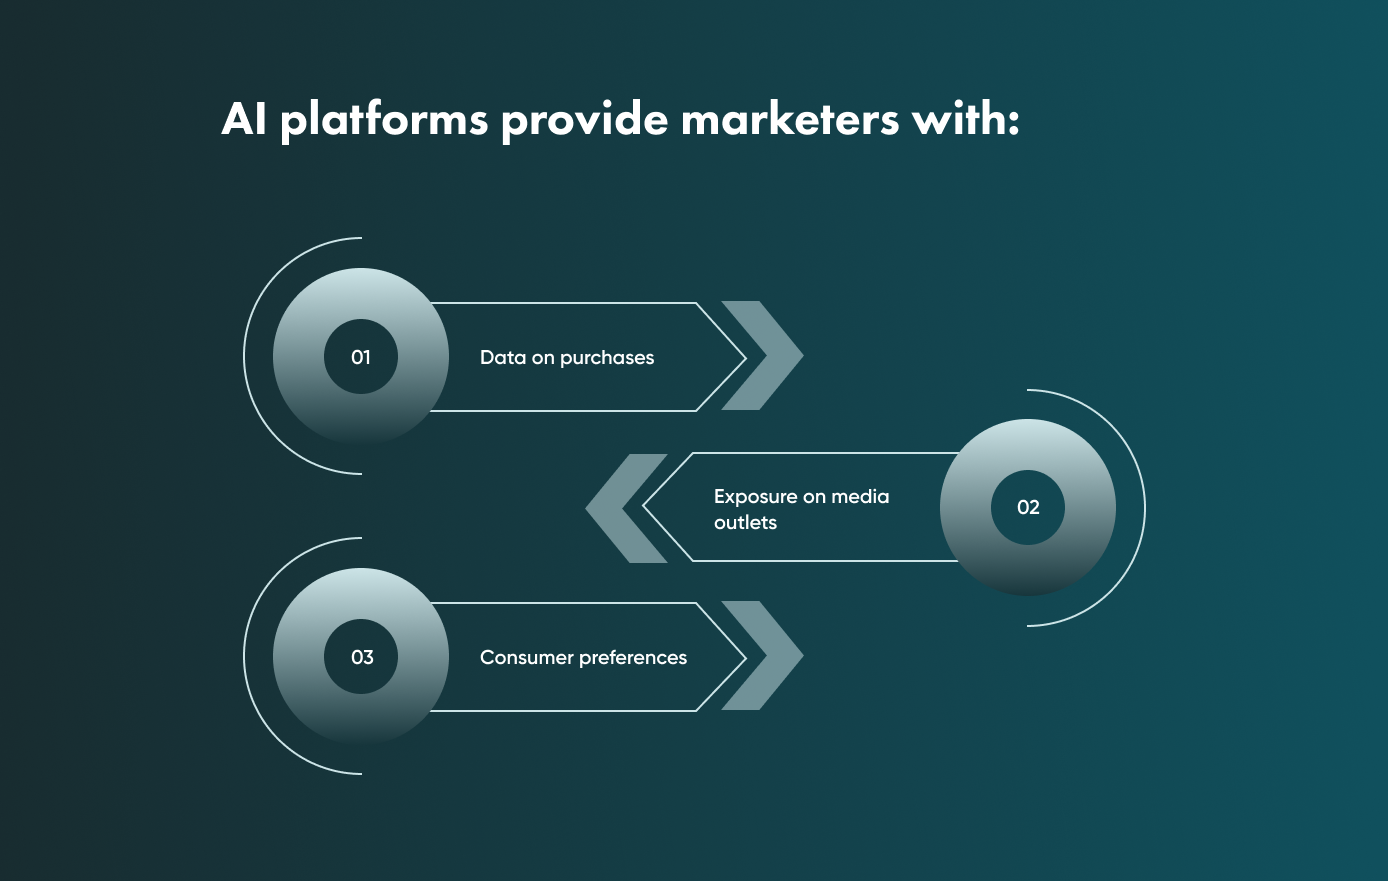 AI platforms will help marketing departments in these 3 ways: data on purchases, exposure on media outlets, and consumer preferences. 